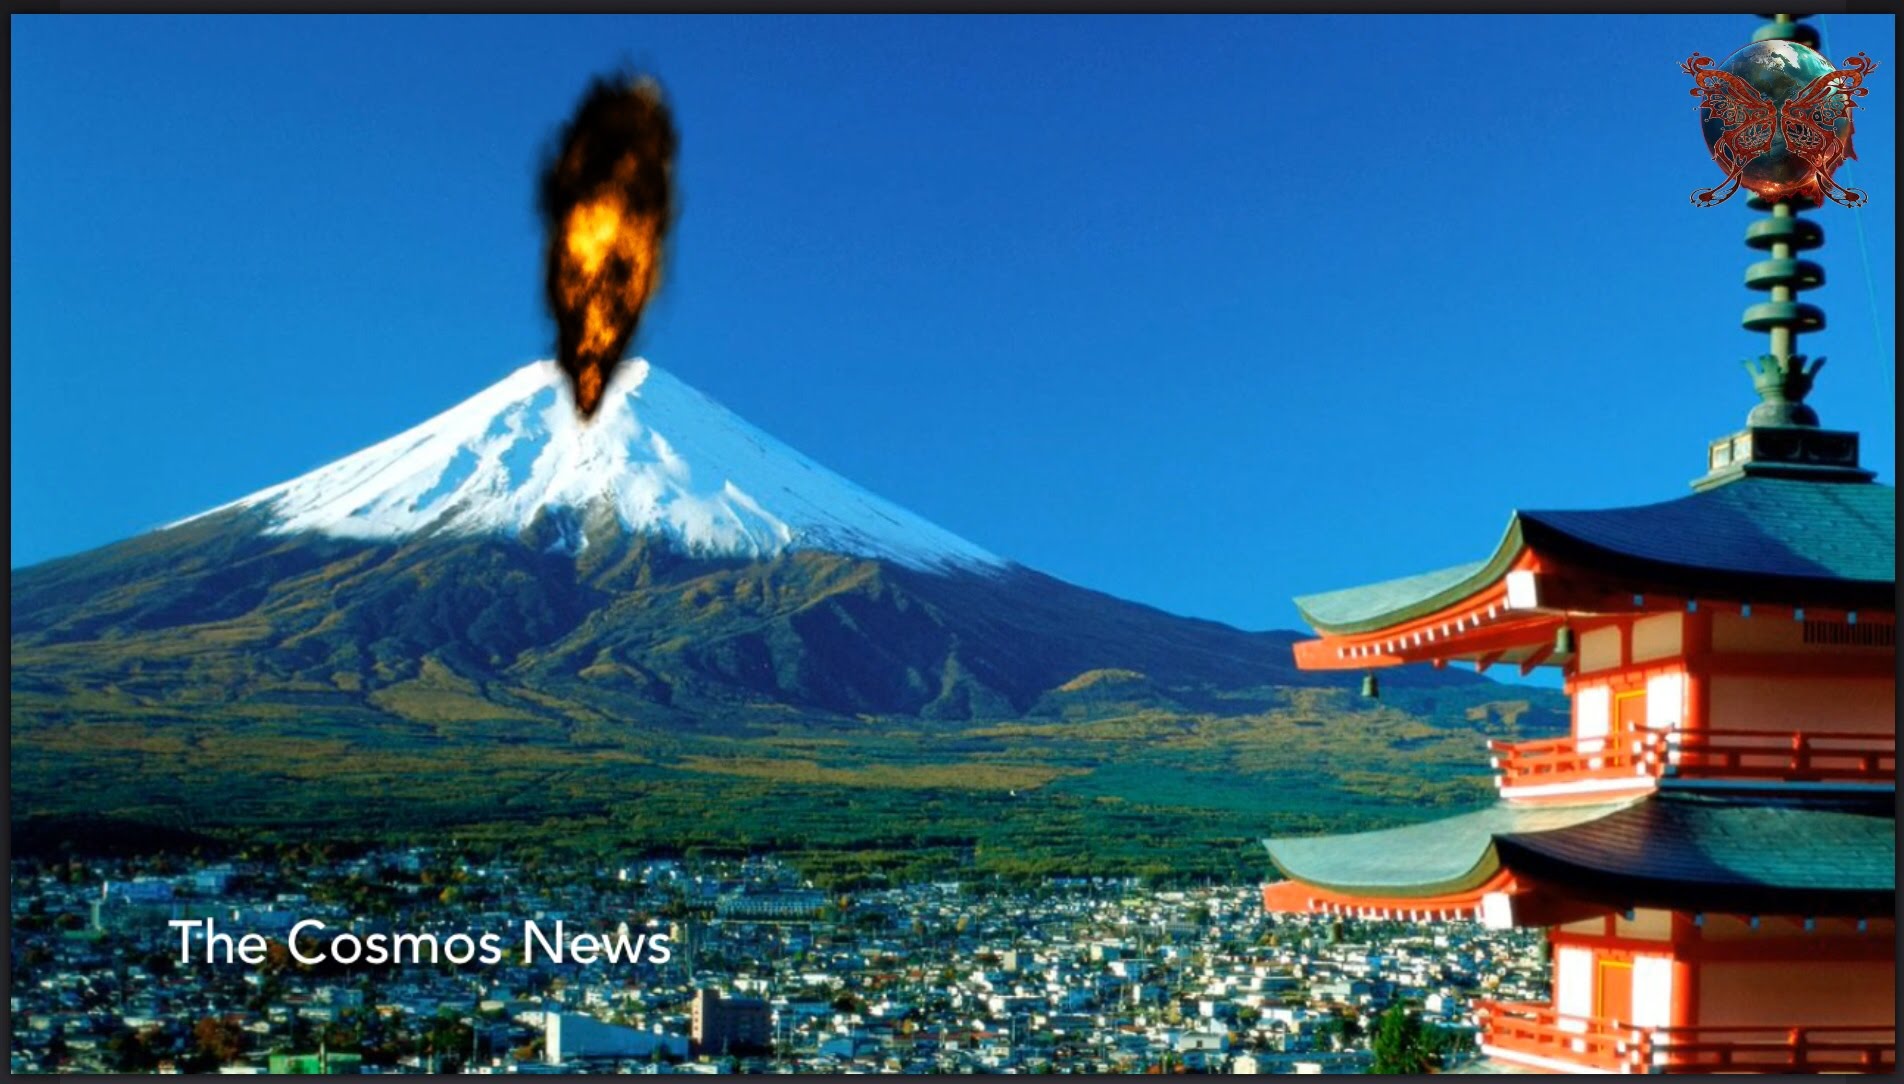 Could Mount Fuji be the next Japanese volcano to erupt? - YouTube